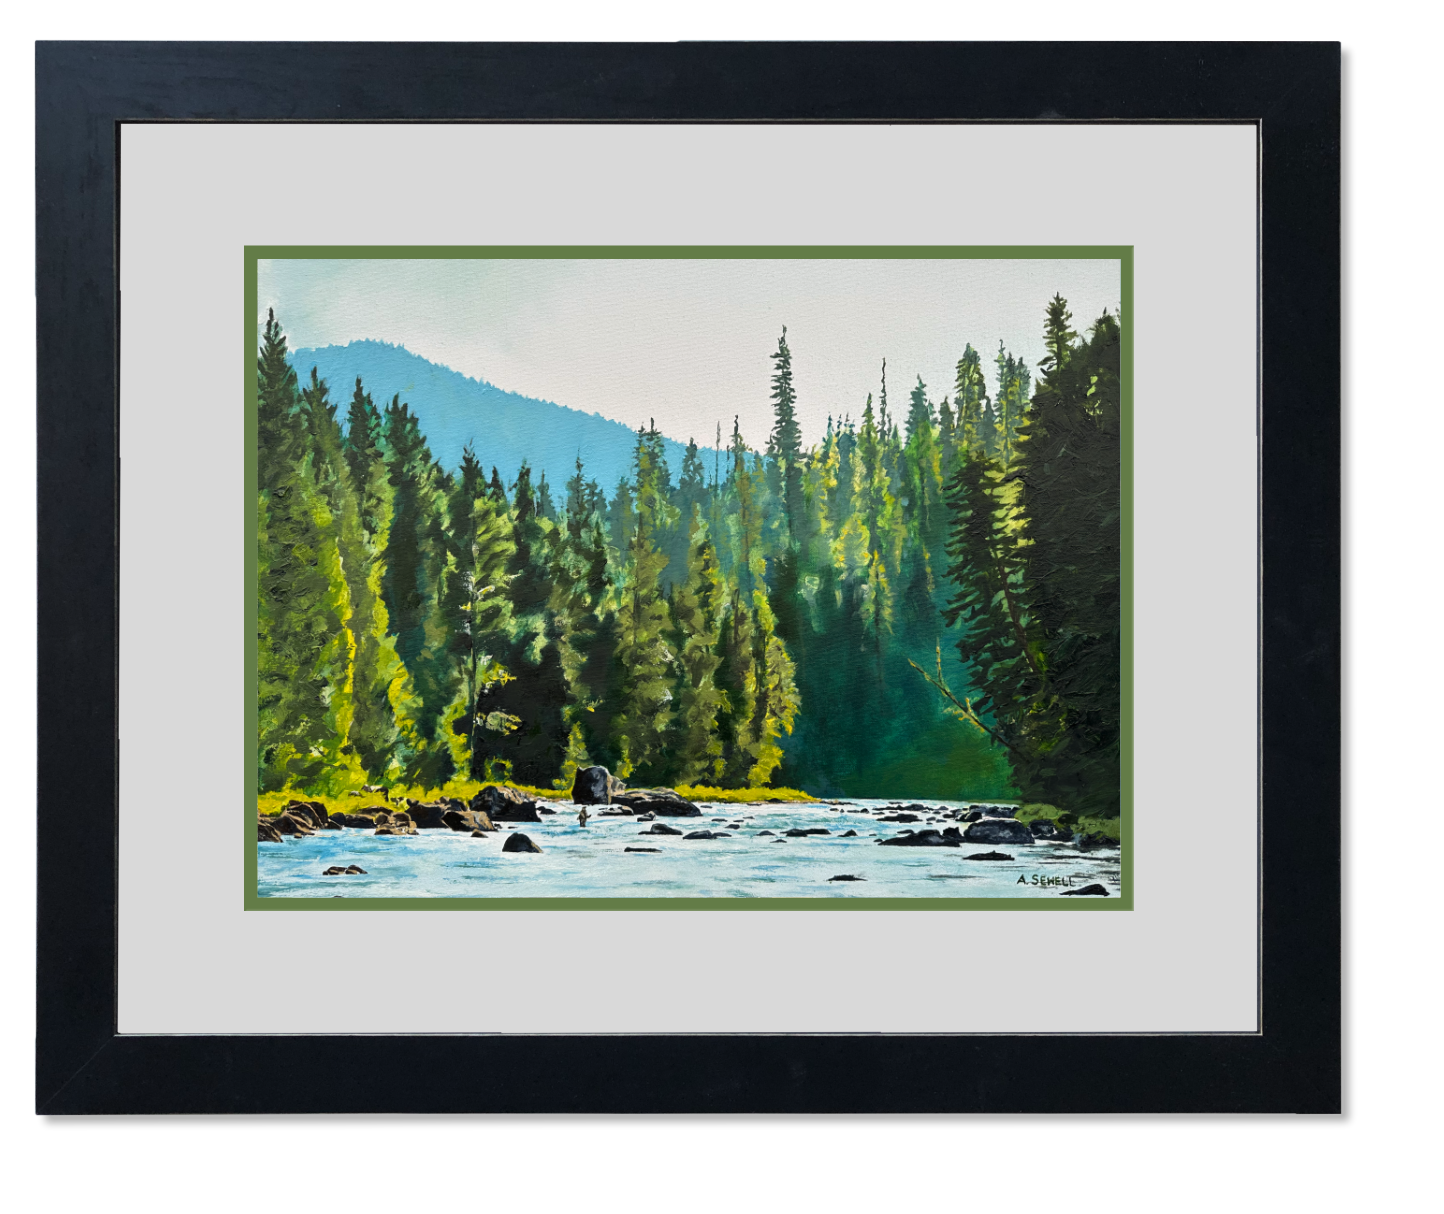 "Alone on the Lochsa" - an Original Oil Painting or Open Edition Print of a Fly-fisherman on North Idaho's Lochsa River.